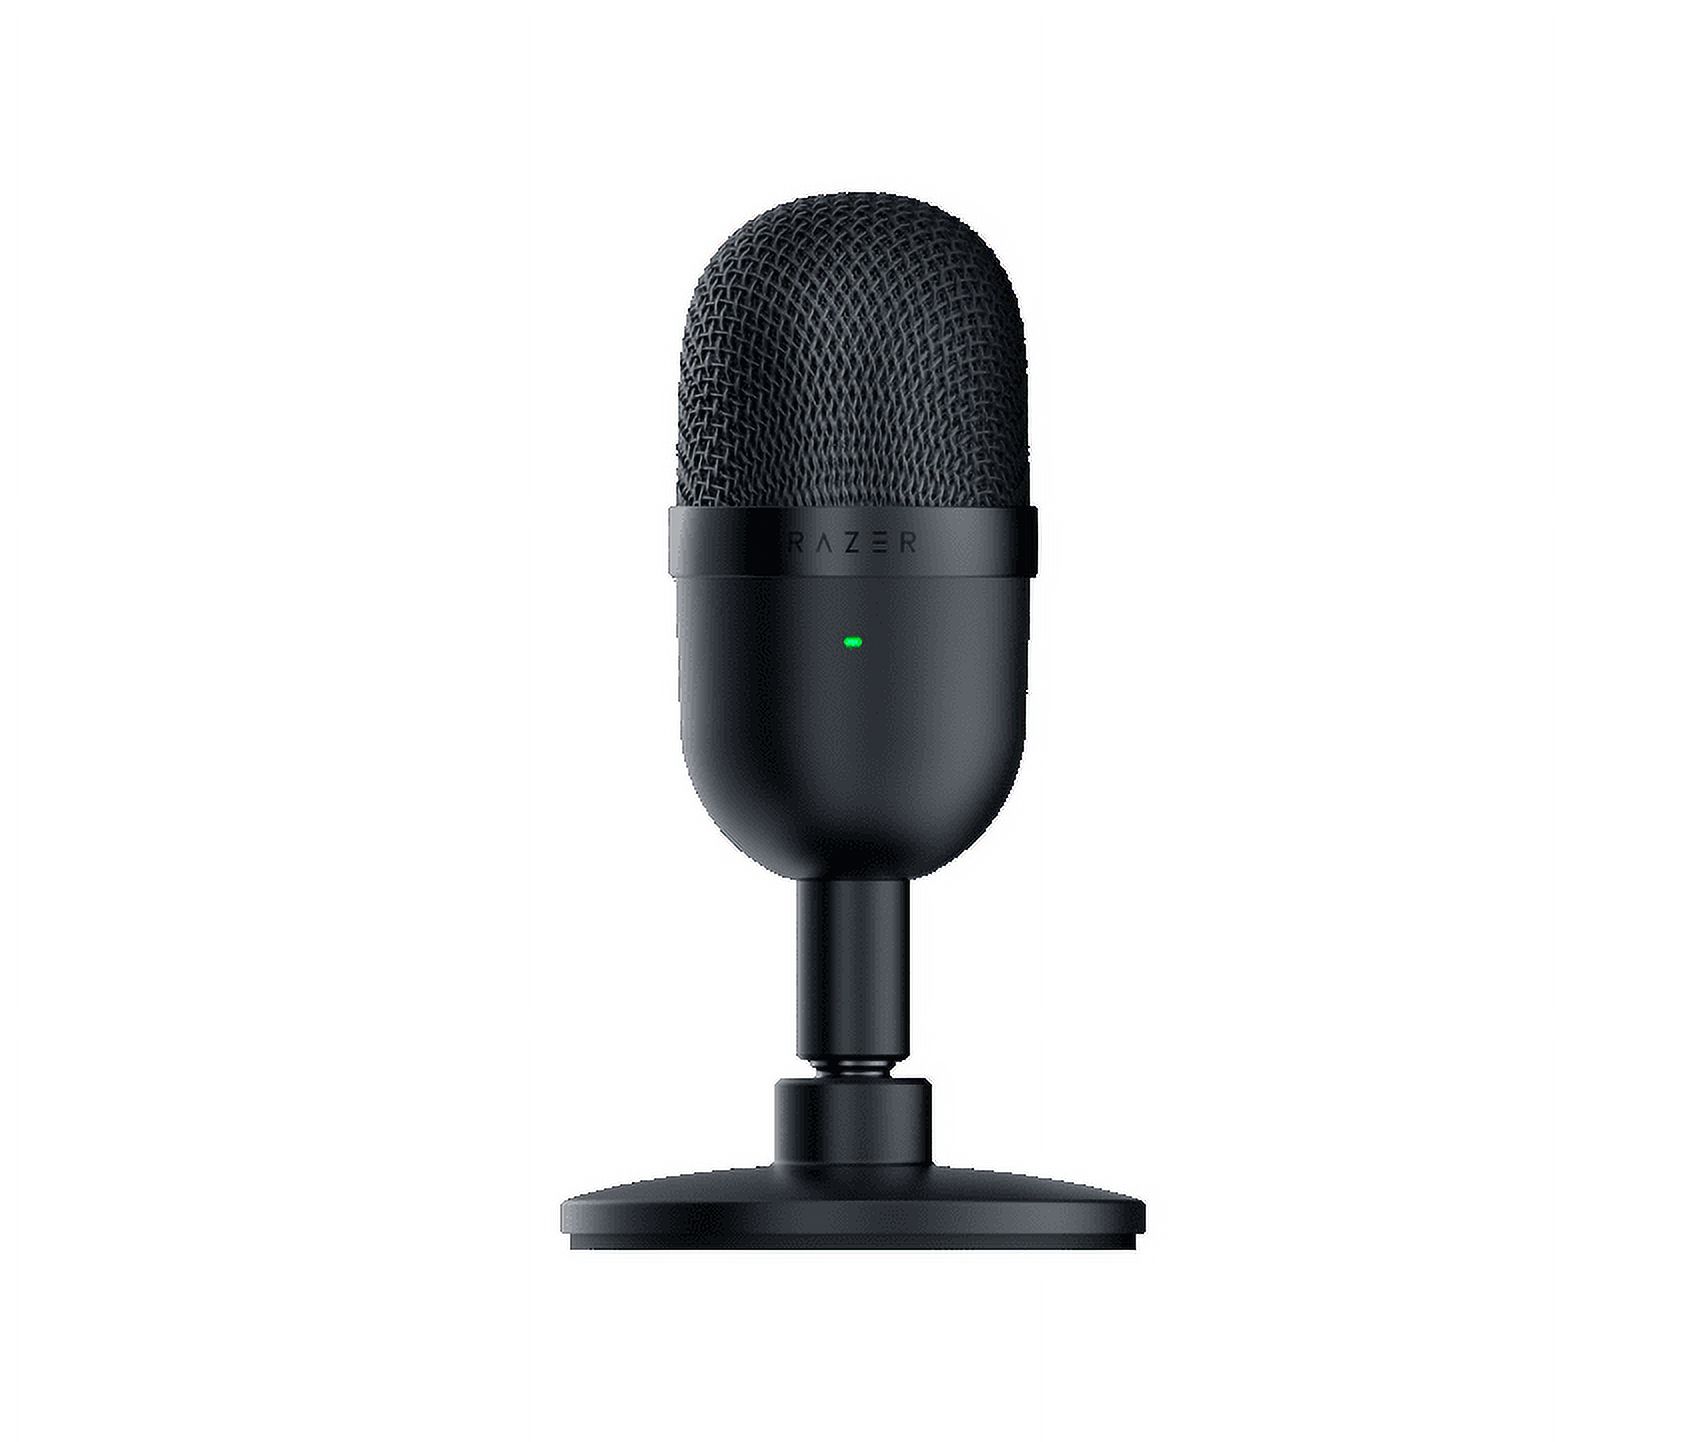 Razer Seiren Mini USB Ultra Compact Condenser Microphone for Streaming and Gaming on PC, Black - image 2 of 3